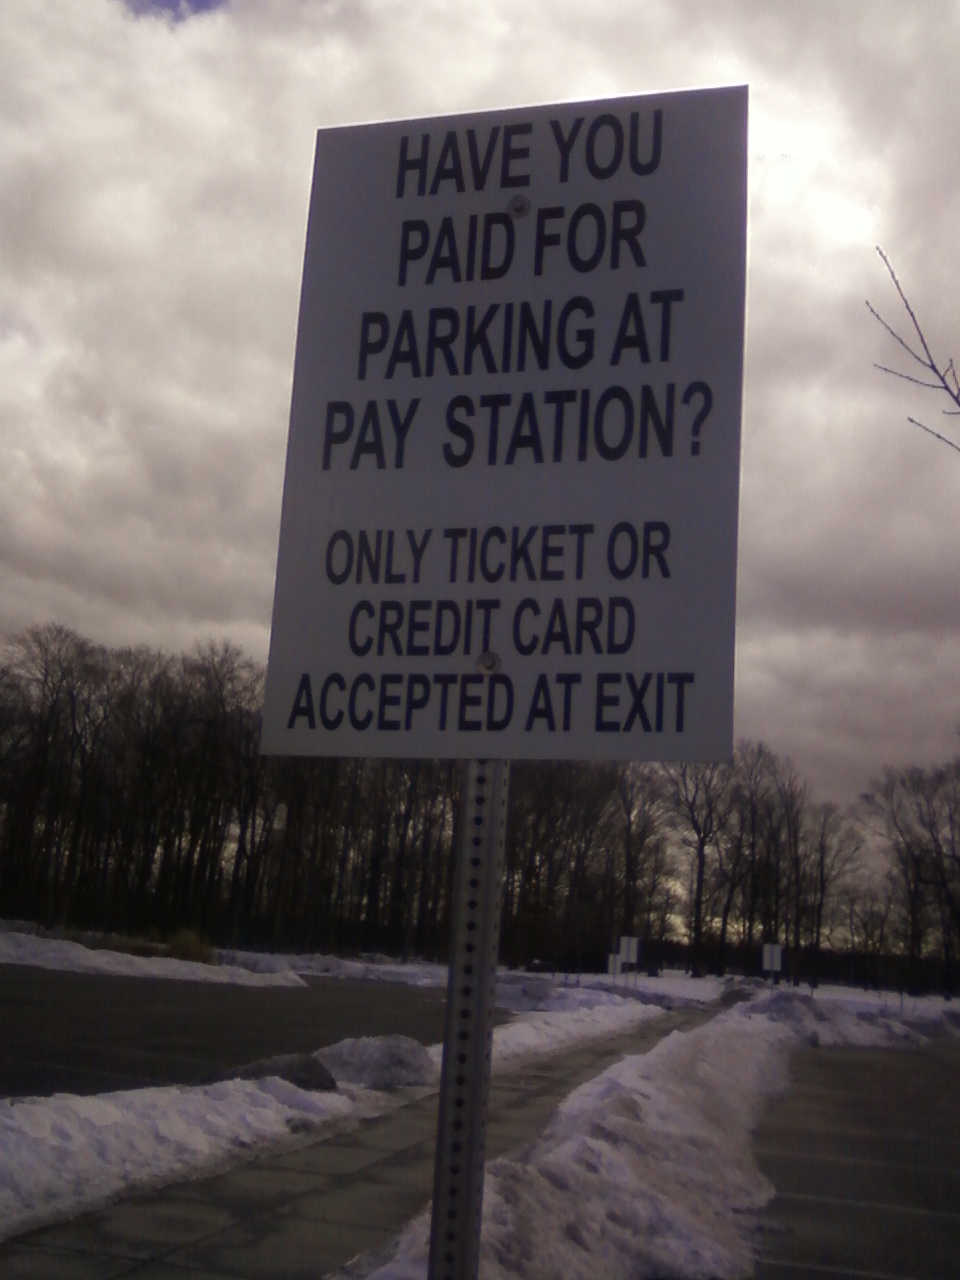 Complaints about Goat Island parking mount; Resentment of State Agency builds among local residents